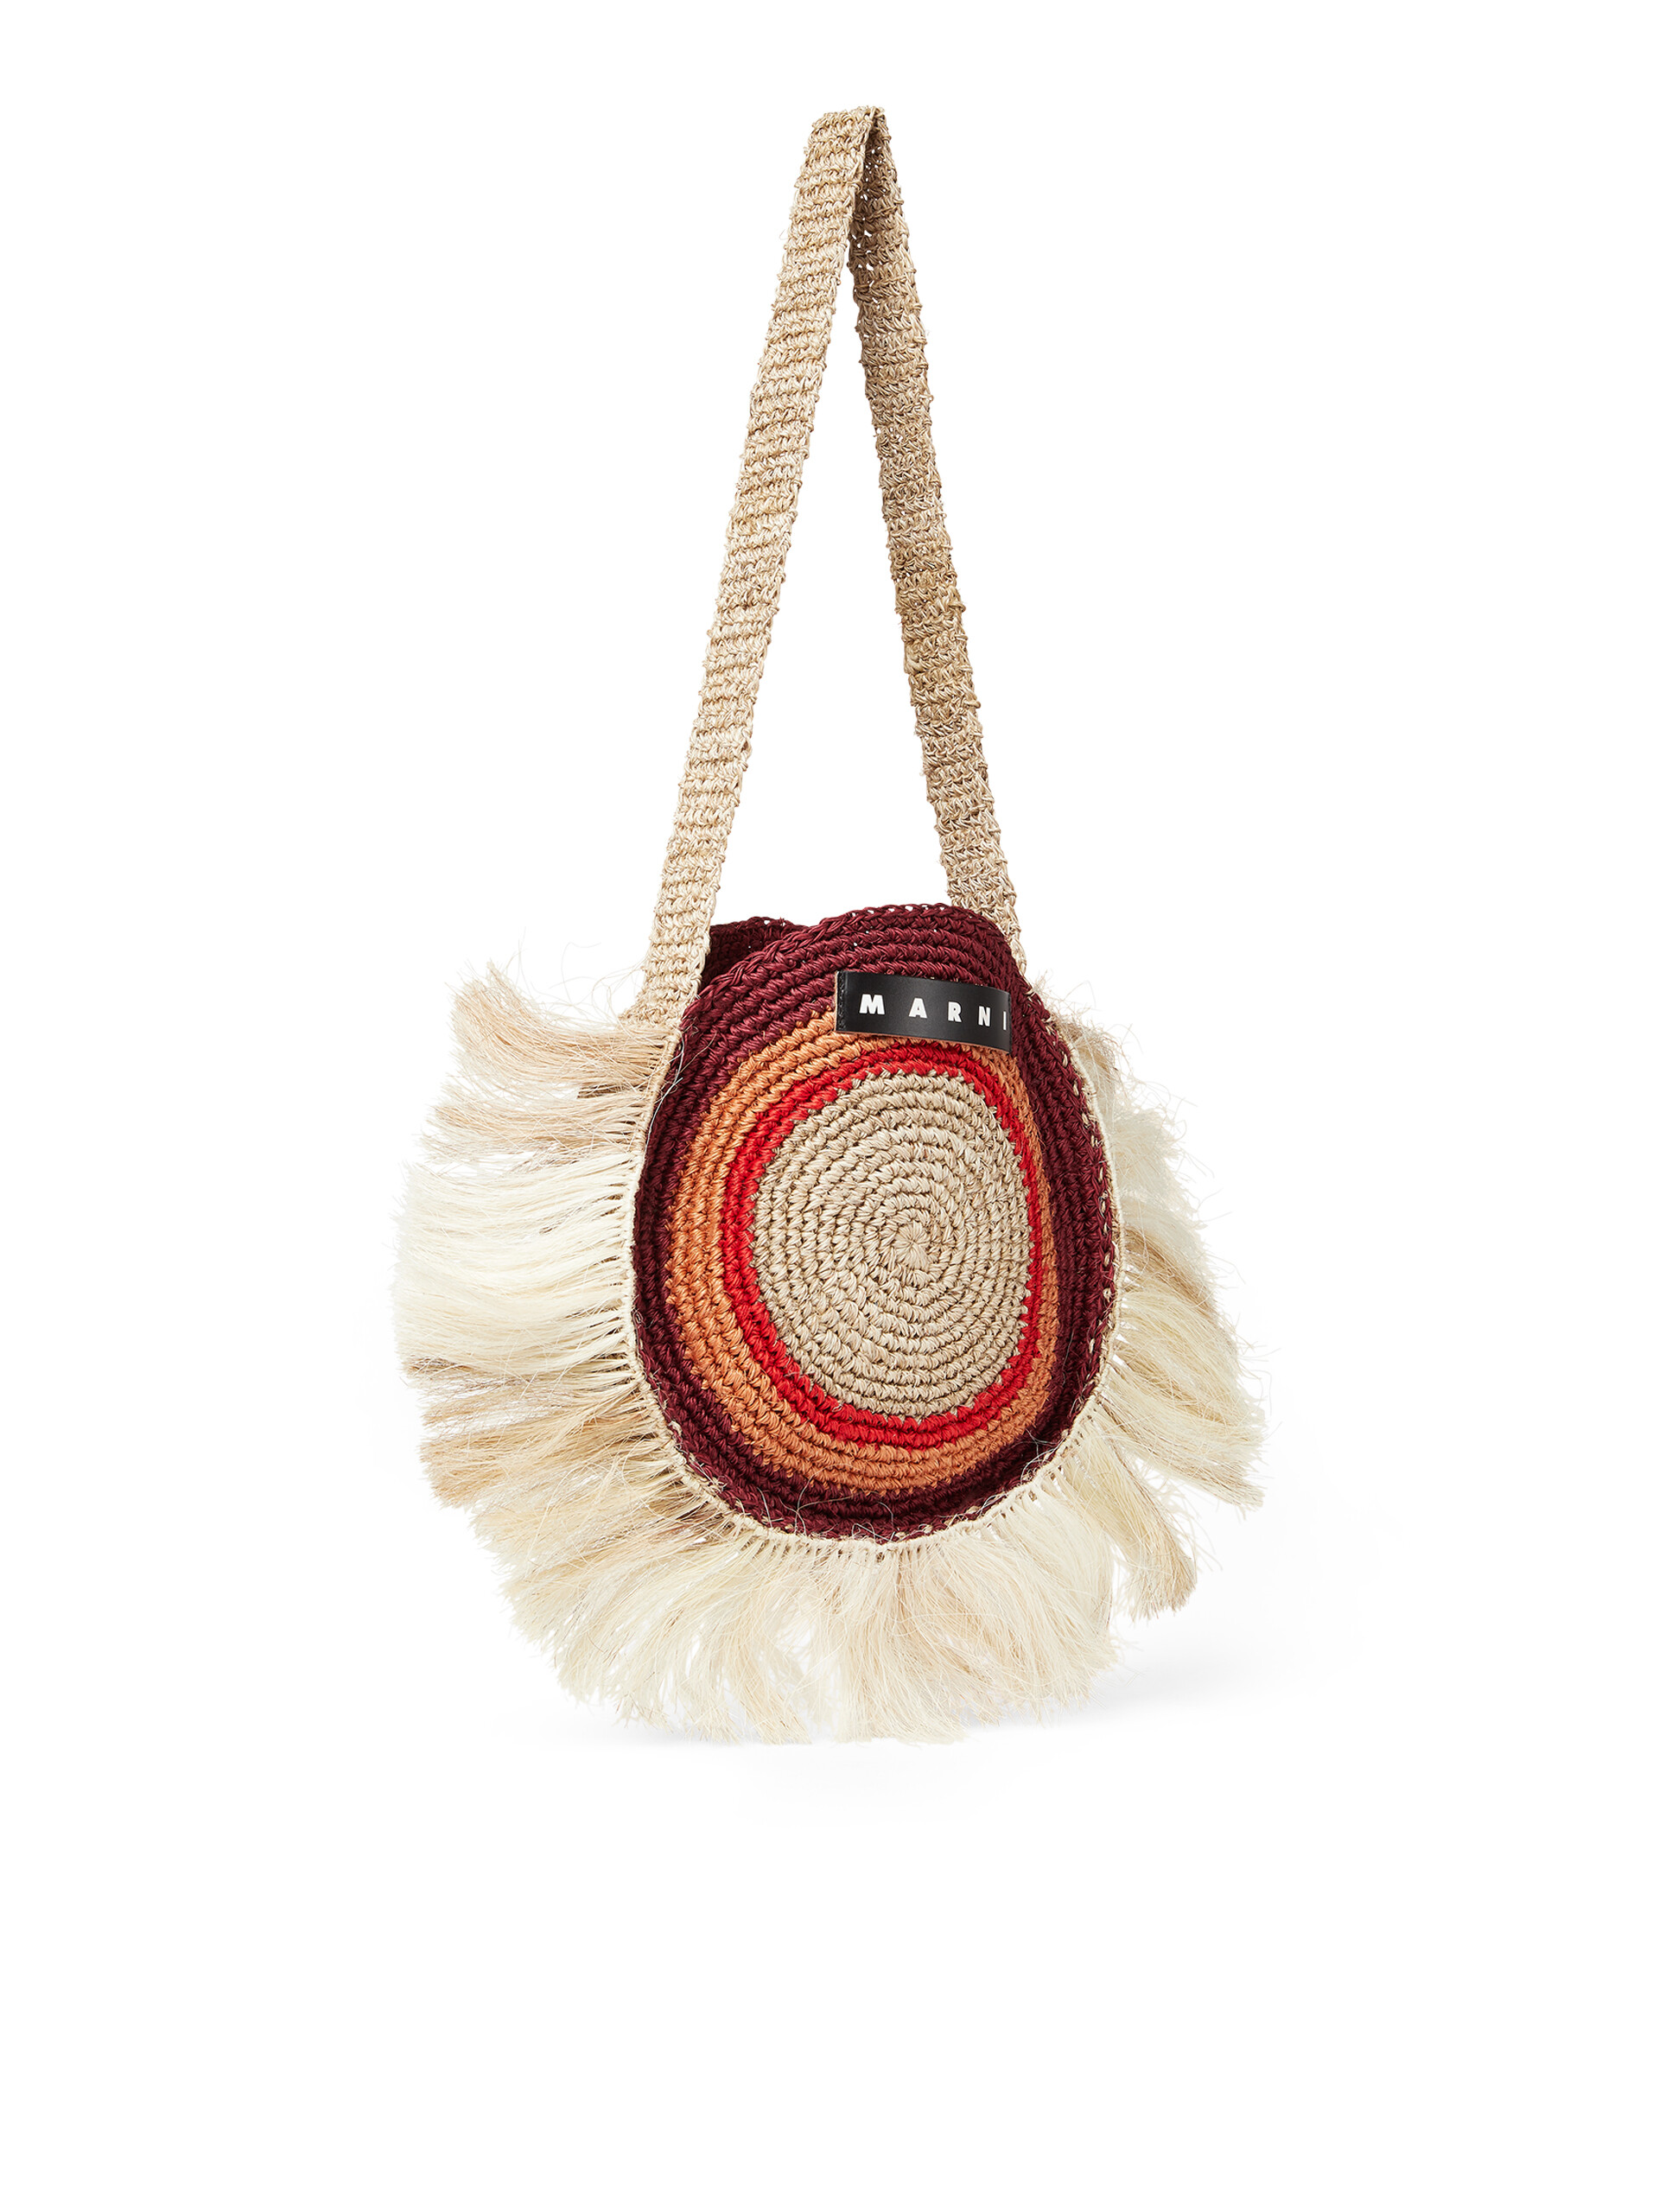 MARNI MARKET cross-body bag in natural fibre with fringes - Bags - Image 2